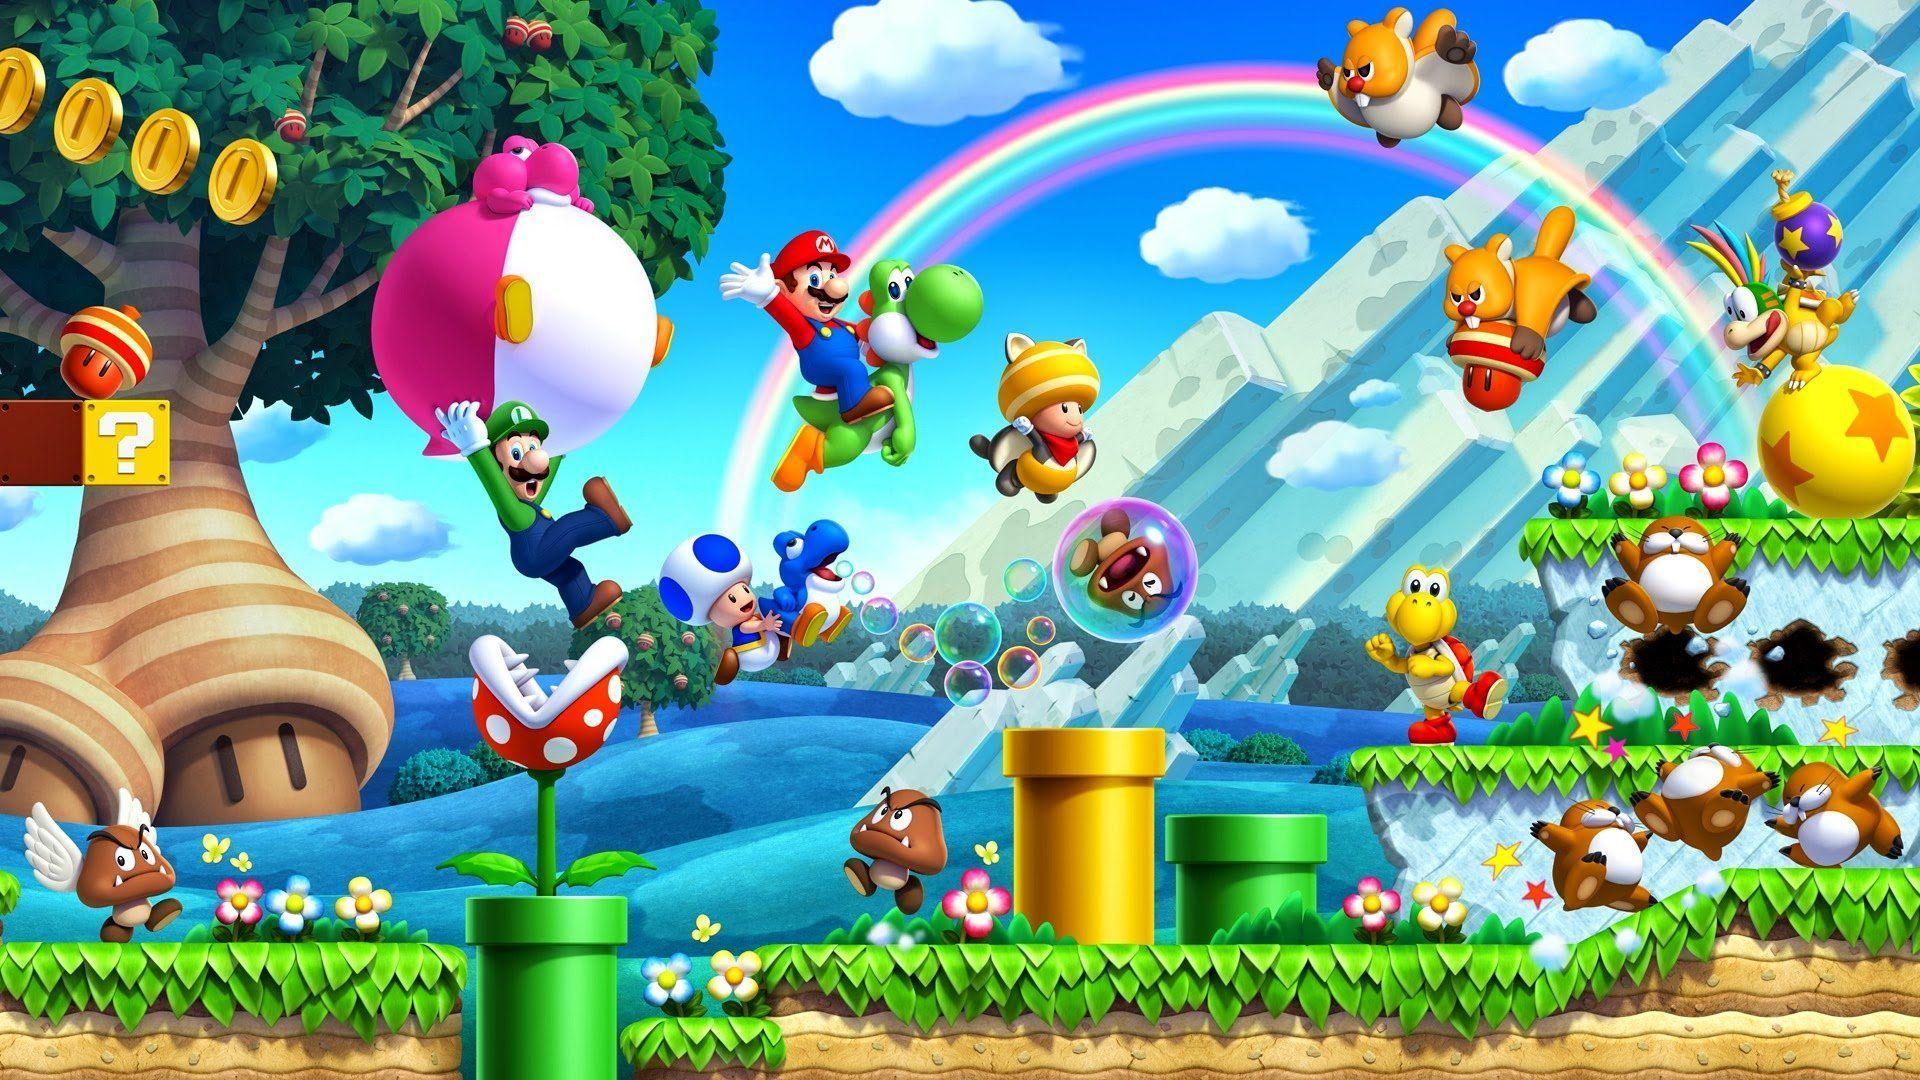 super mario game download for pc 256 mb graphics